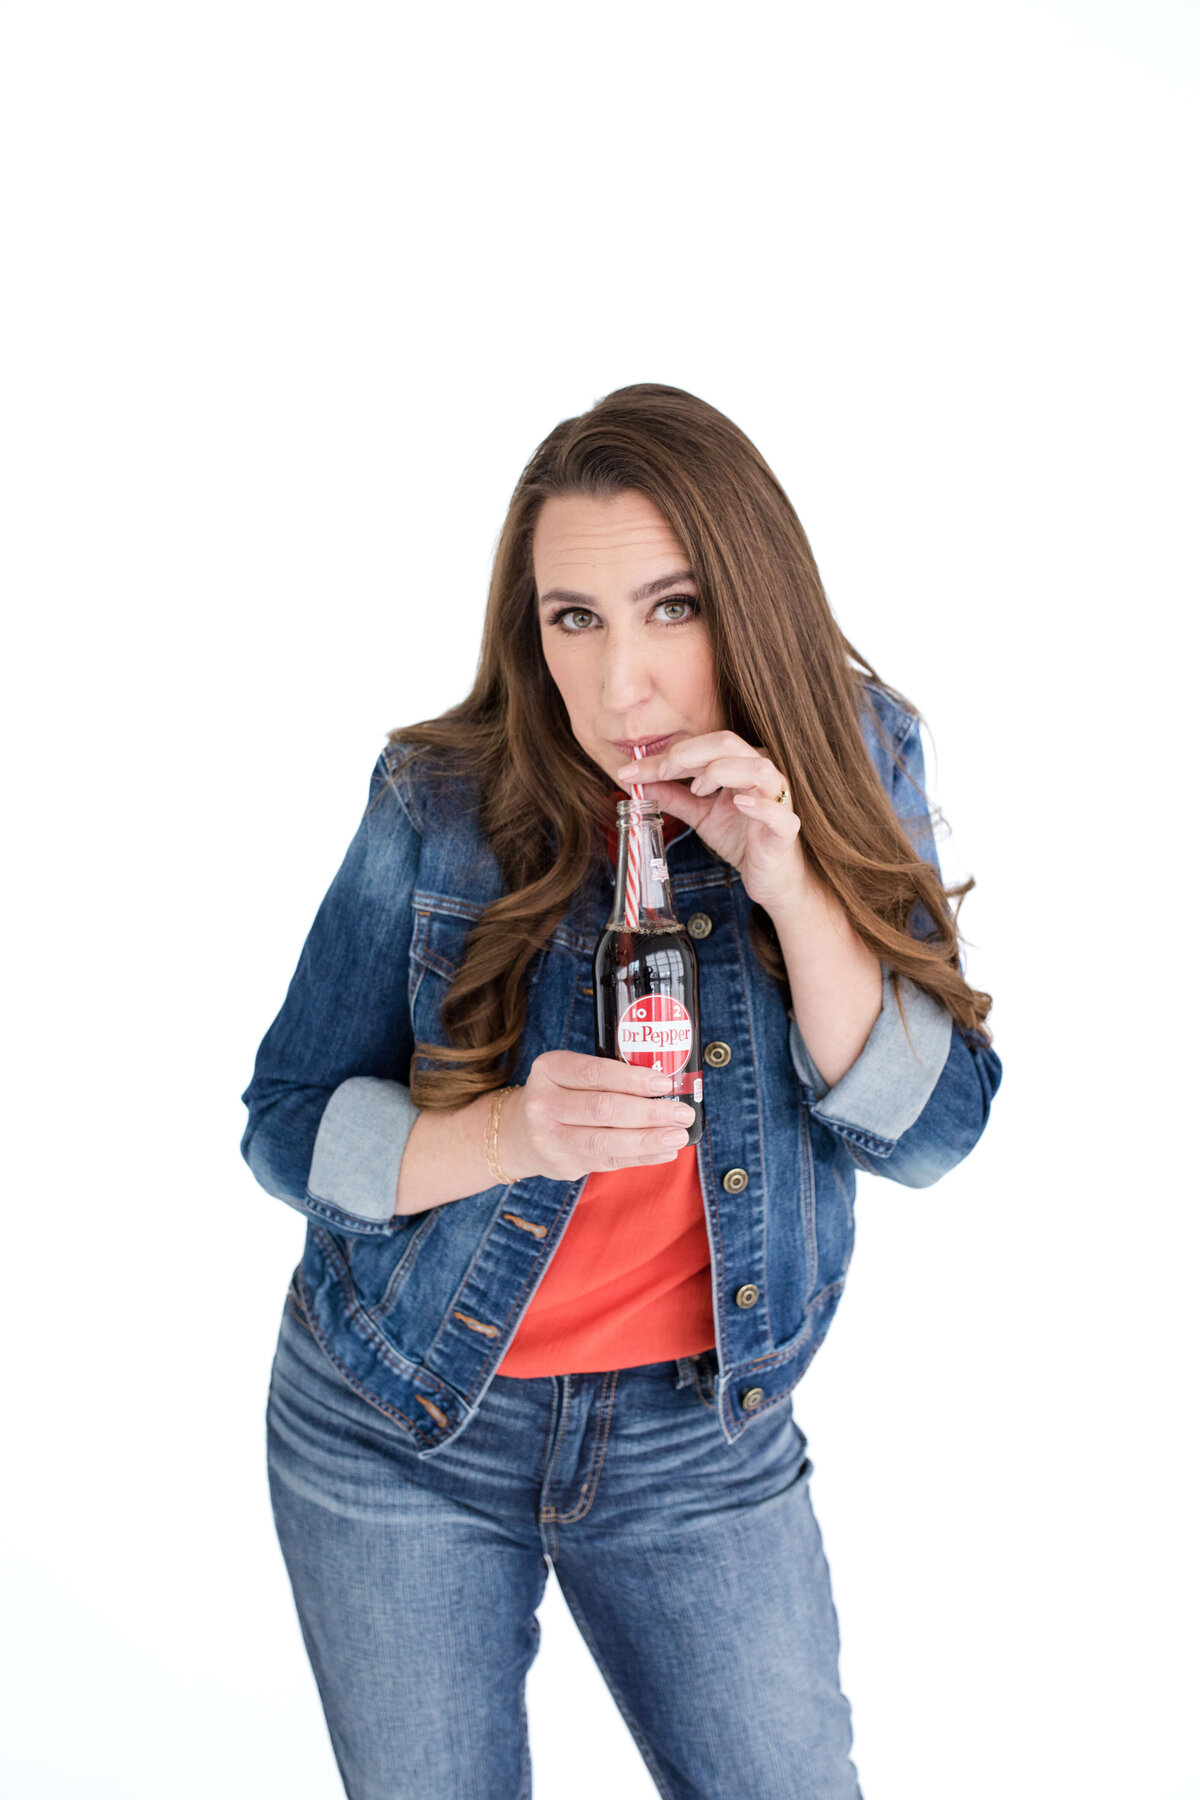 brand photo by brand photographer near me with woman holding a soda bottle and drinking the soda inside while making eye contact with the camera